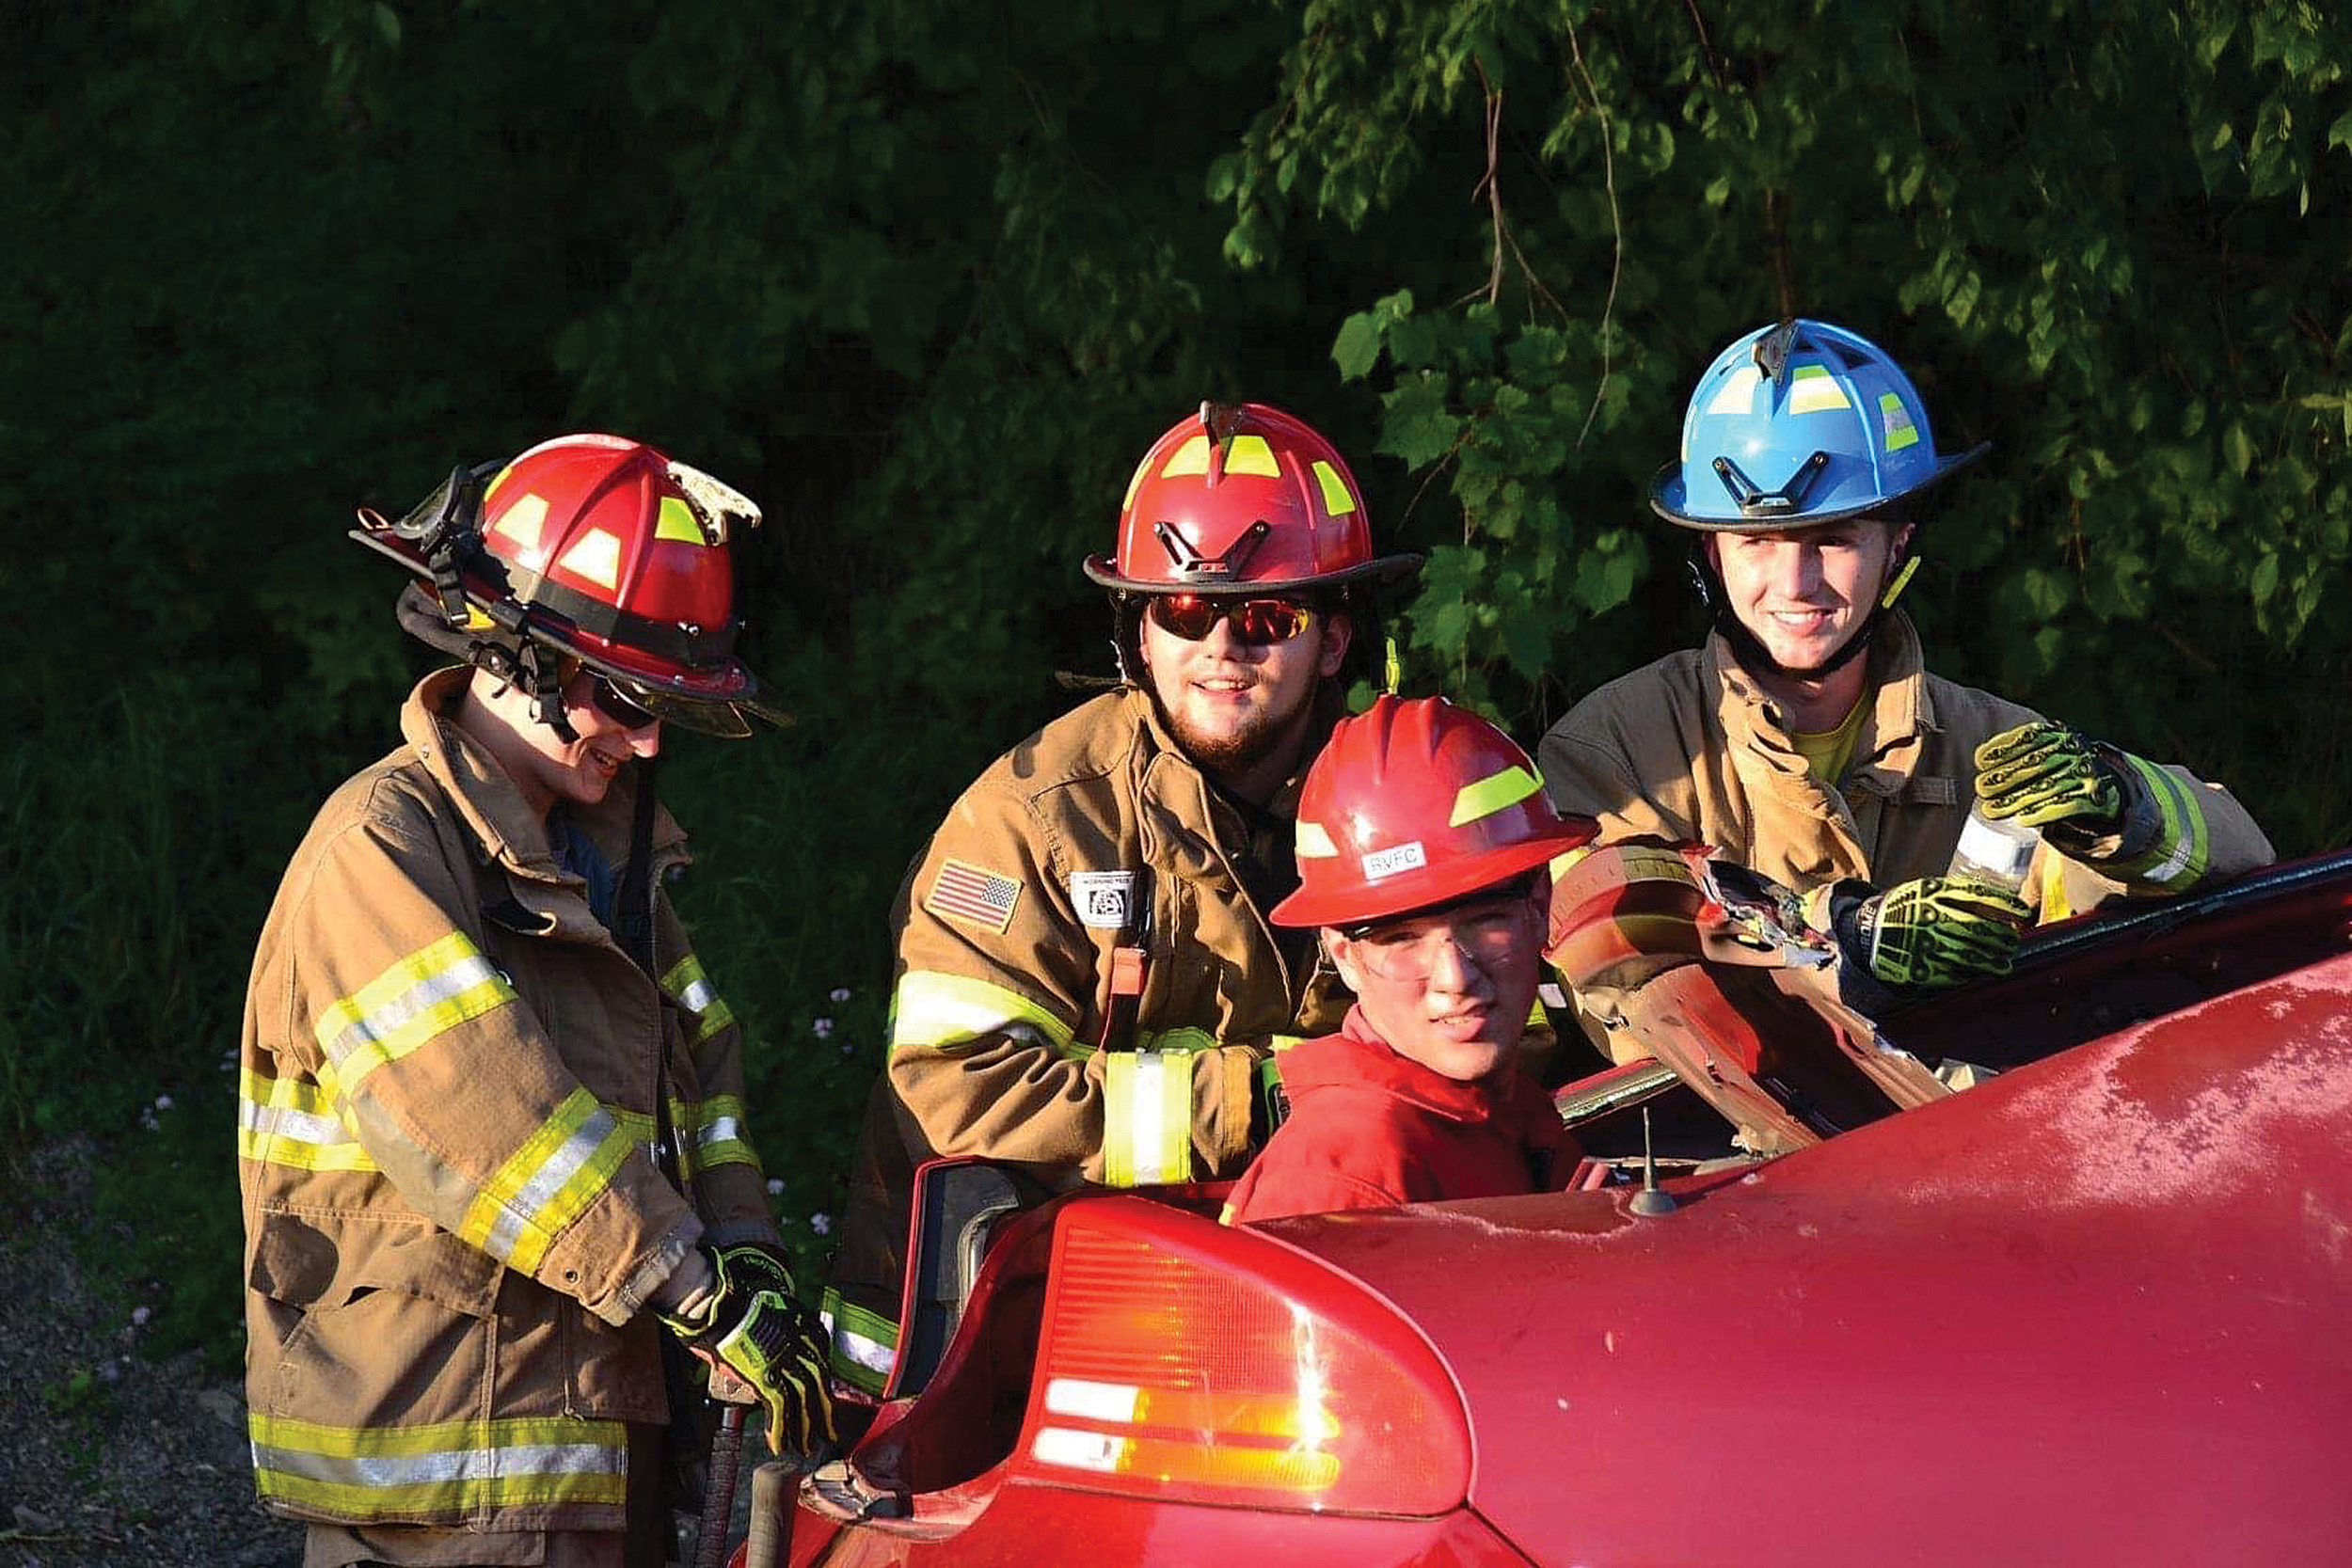 Luke Jelliff, far left, is a fourth-generation firefighter with the Ridgebury Volunteer Fire Co. in Gillett, Bradford County. At 22, he’s the fire company’s youngest active member and part of its next generation.